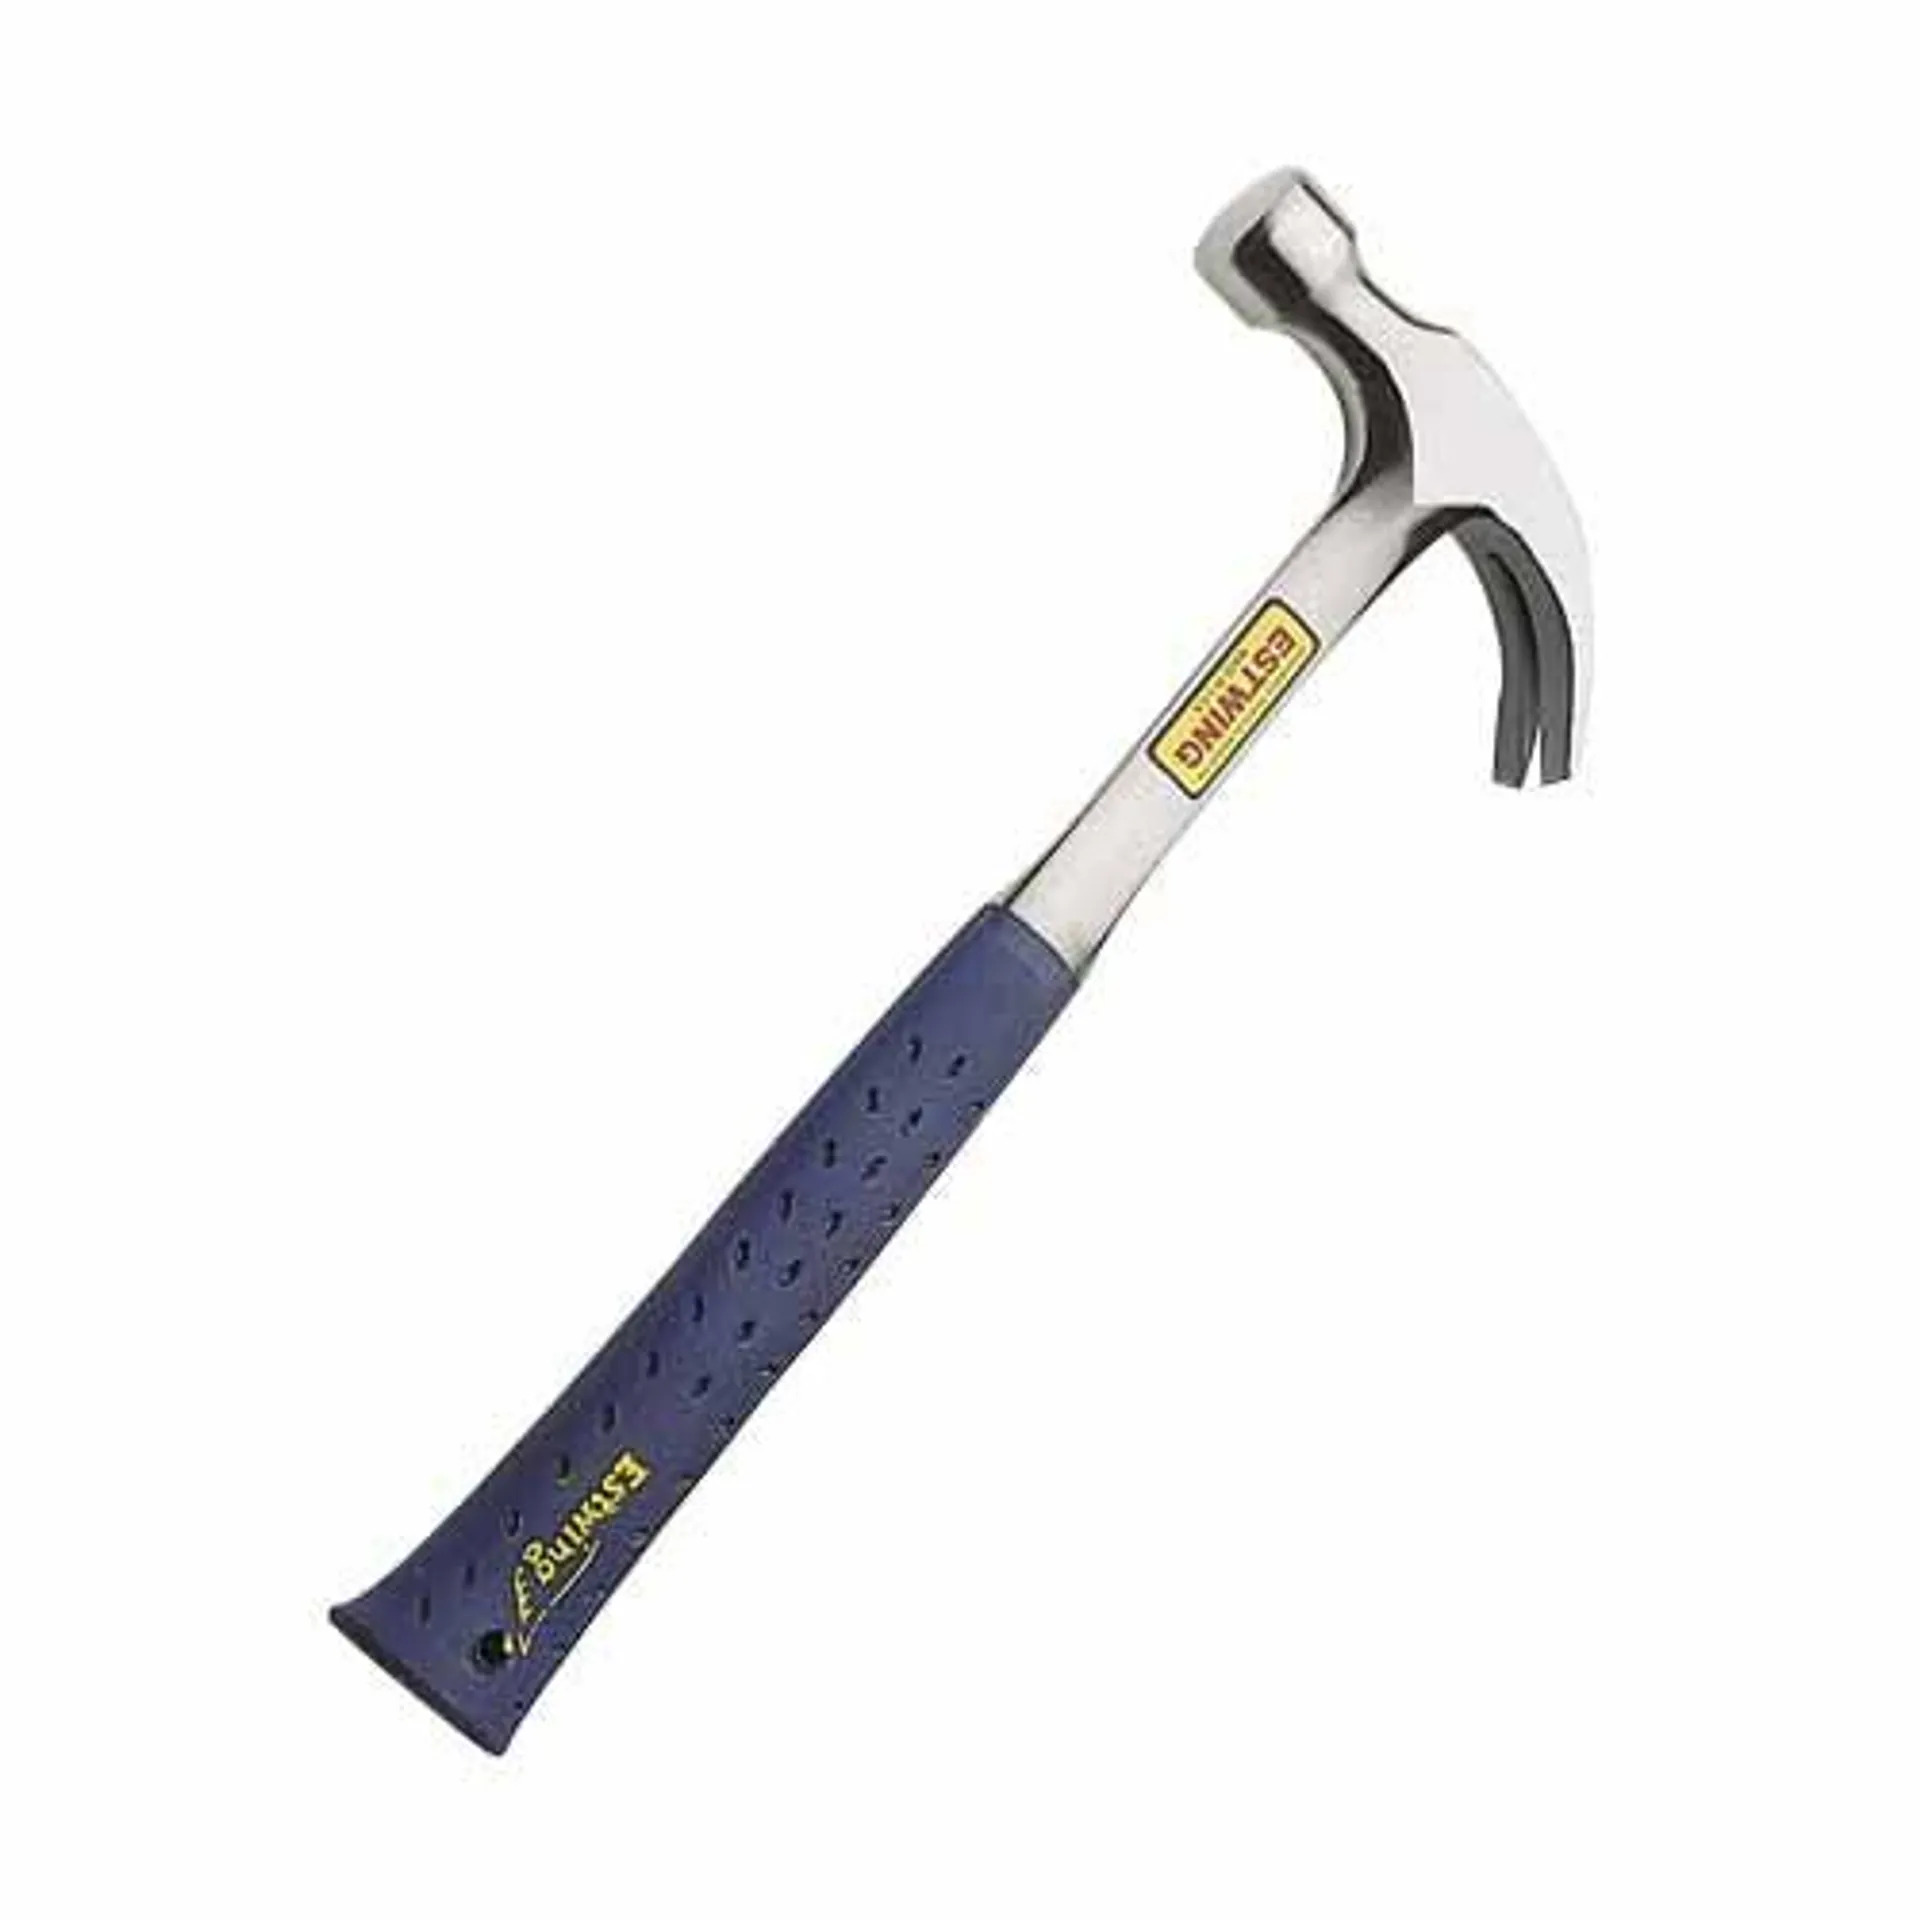 Estwing 20oz Hammer 577g Silver with Blue Handle